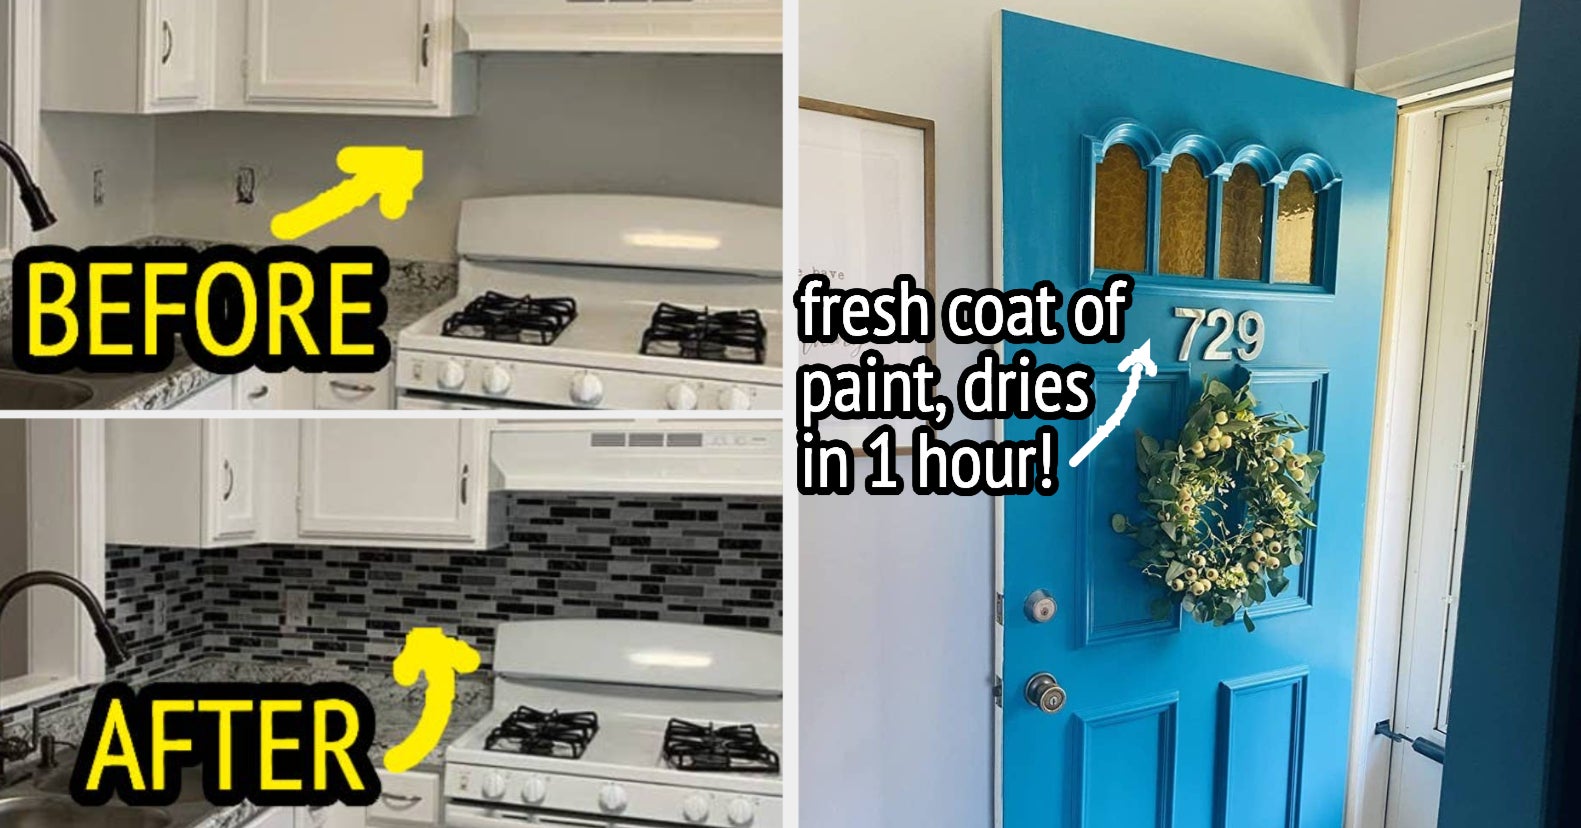 32 Items To Make Any Home A Real Estate Agent's Dream